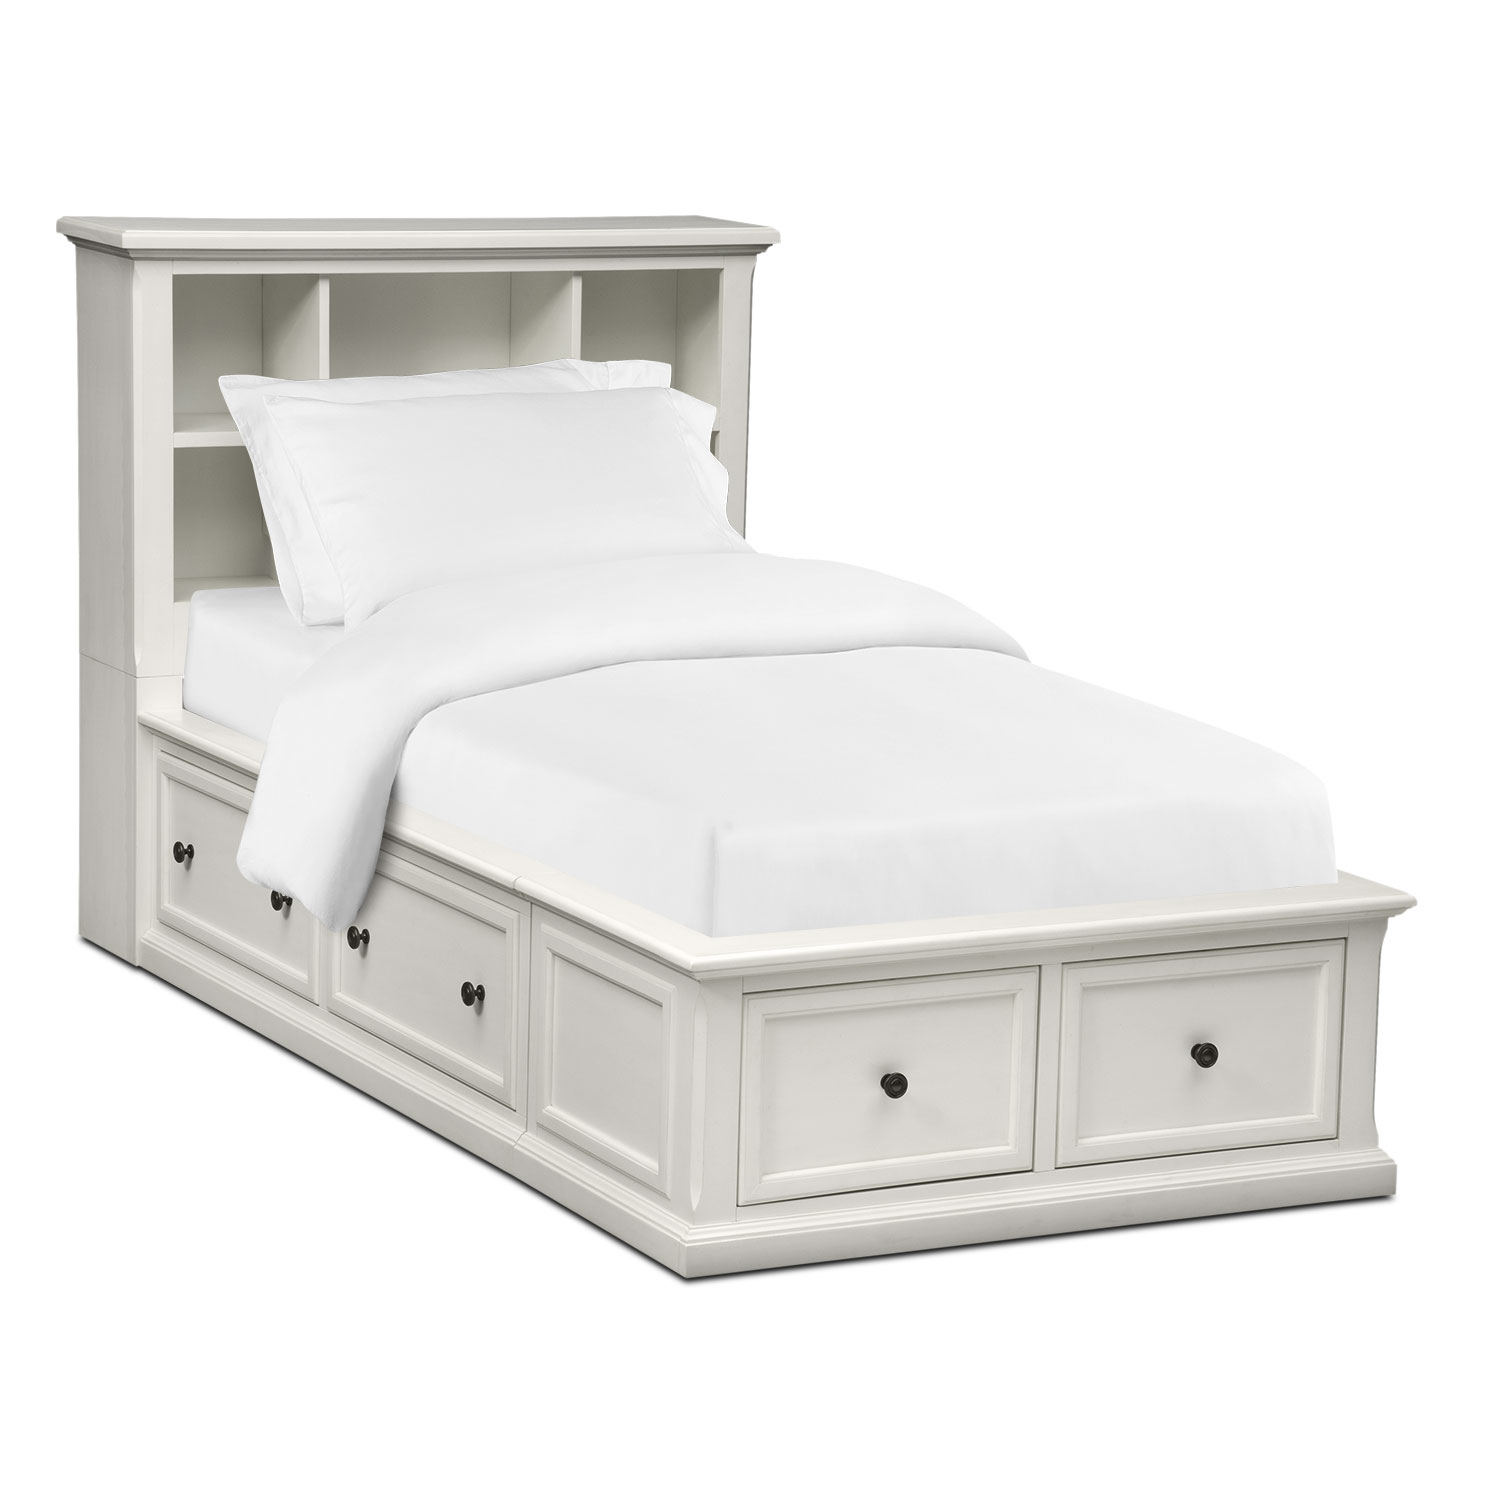 White Twin Bed With Storage Visualhunt, Twin Size Bed With Storage Underneath